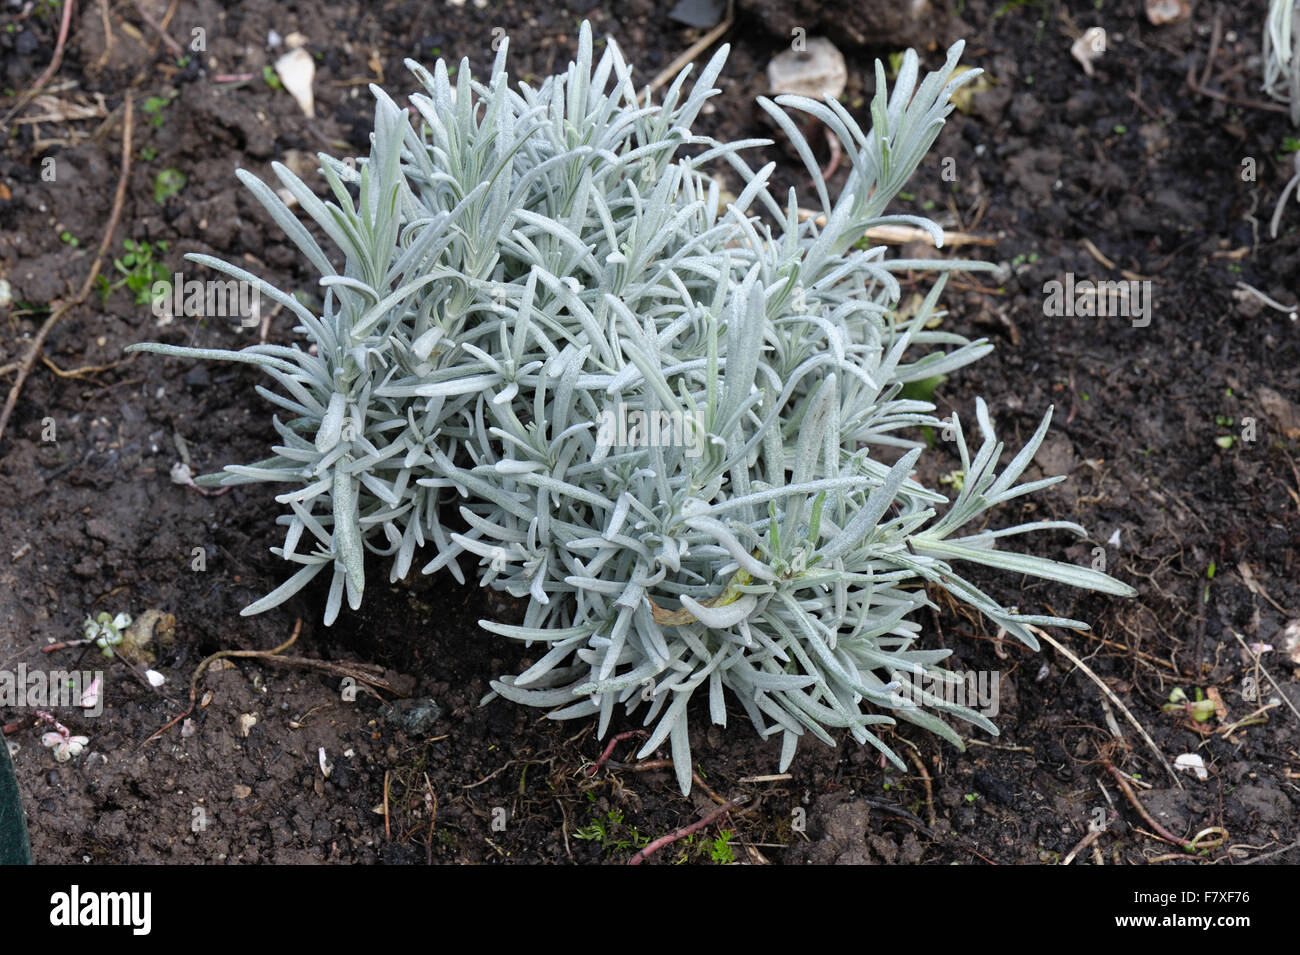 Healthy lavender plant for comparison with one suffering from shab disease, Phomopsis lavandulae, Devon, England, October Stock Photo